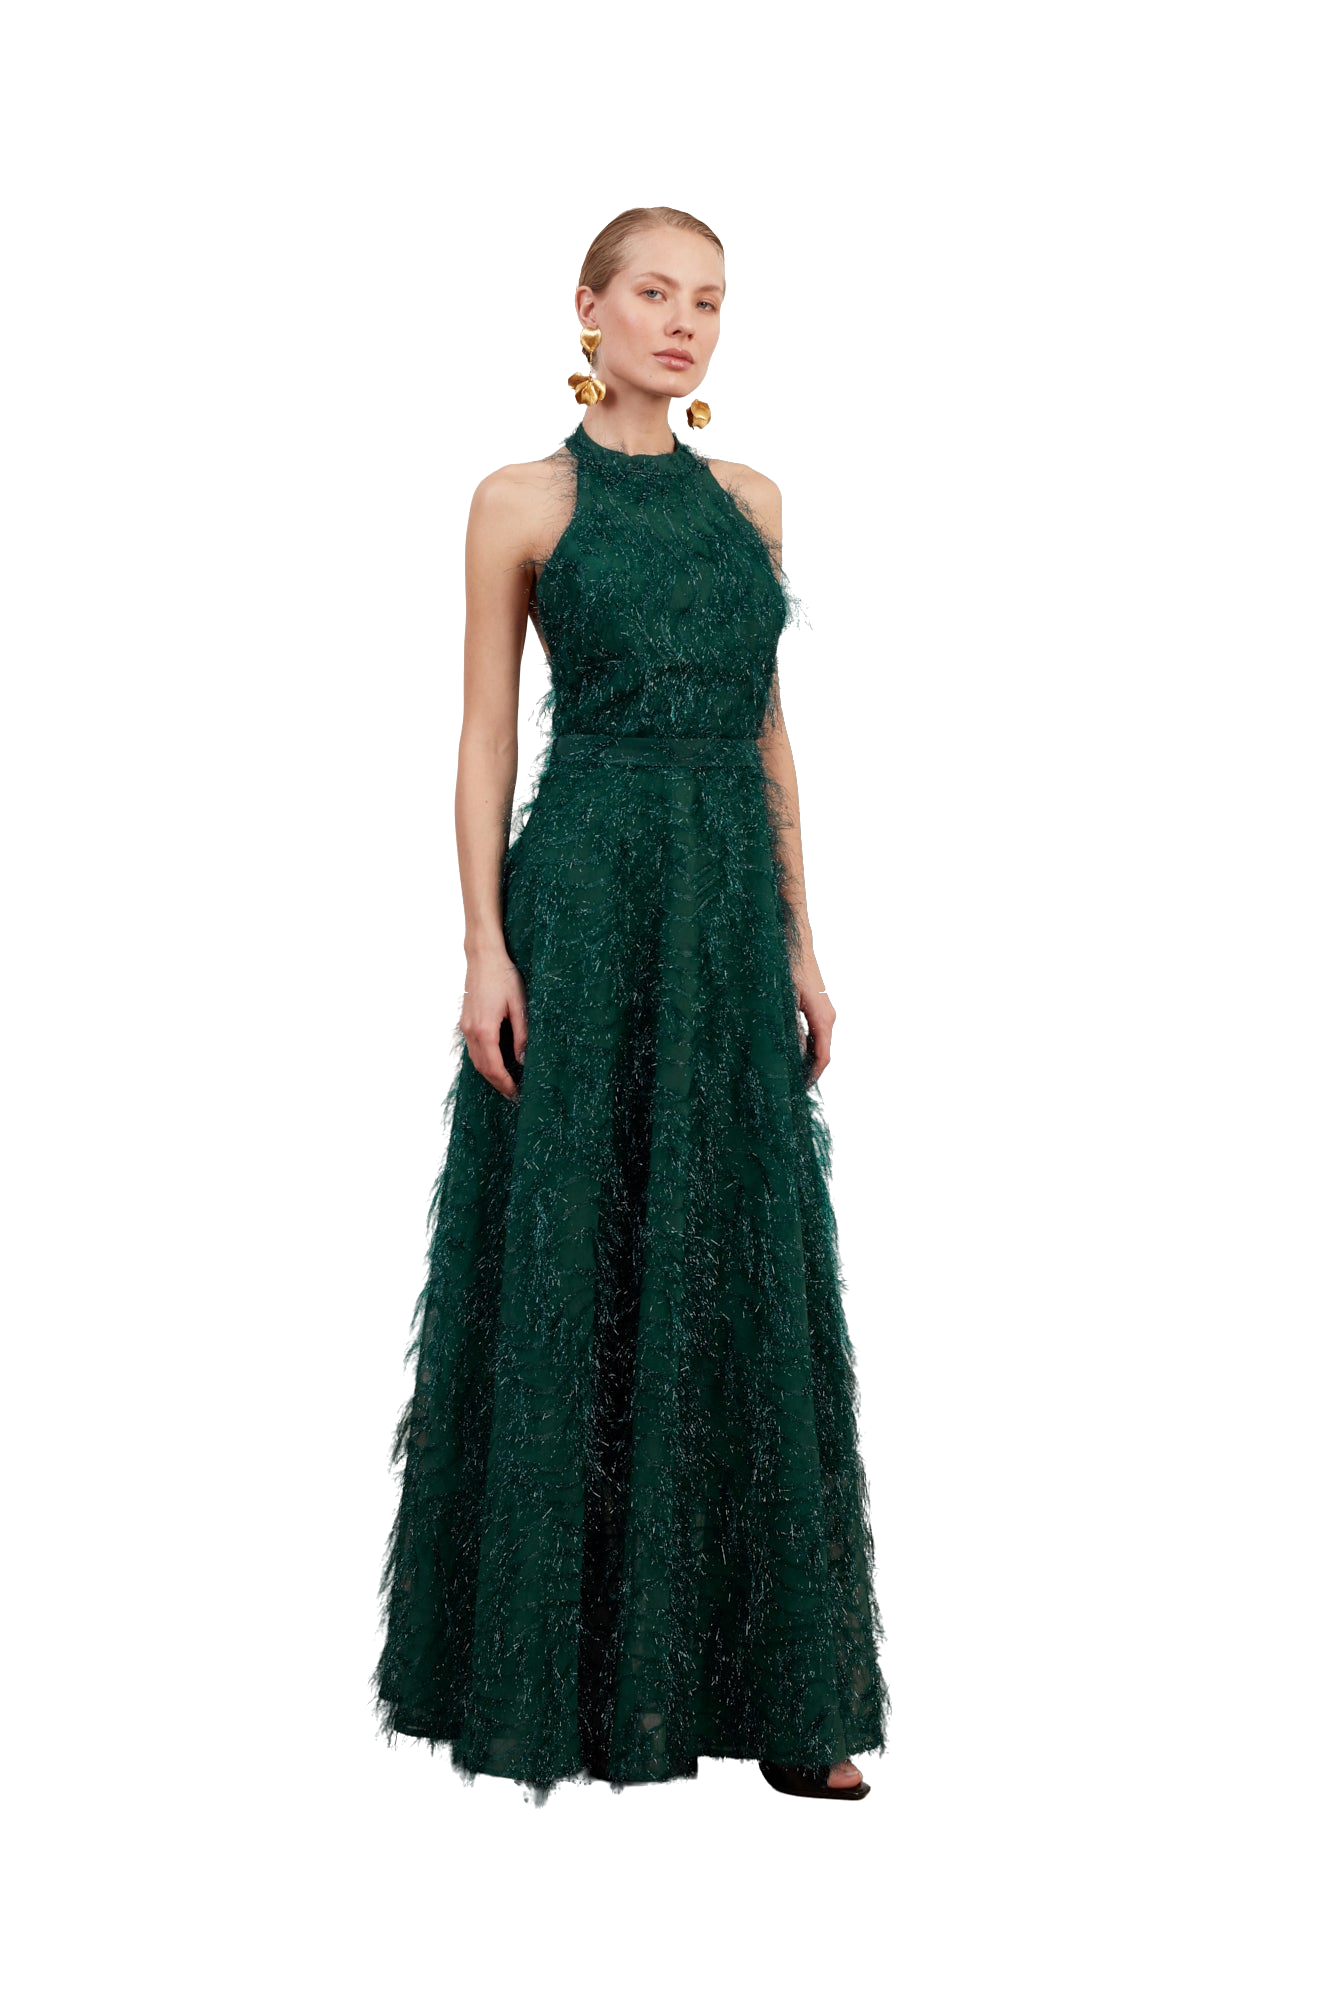 Undress Maissa Green Feather Long Evening Gown With Open Back